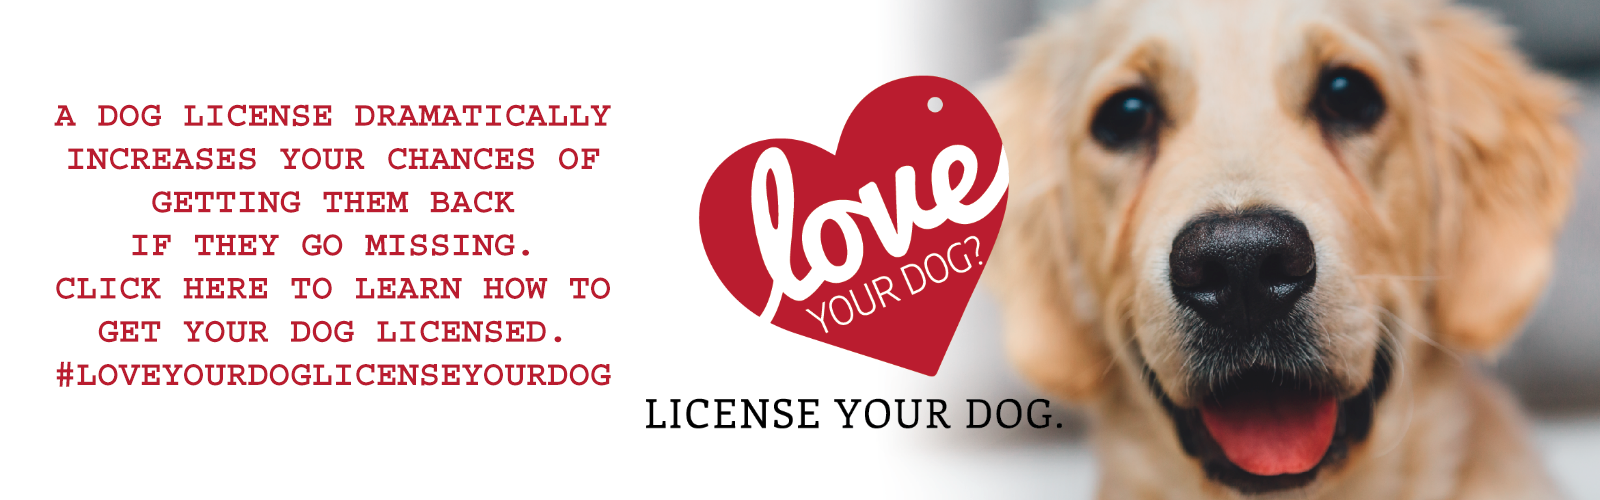 A dog license dramatically increases your chances of getting them back if they go missing.
click here to learn how to get your dog licensed. #LoveYourDogLicenseYourDog